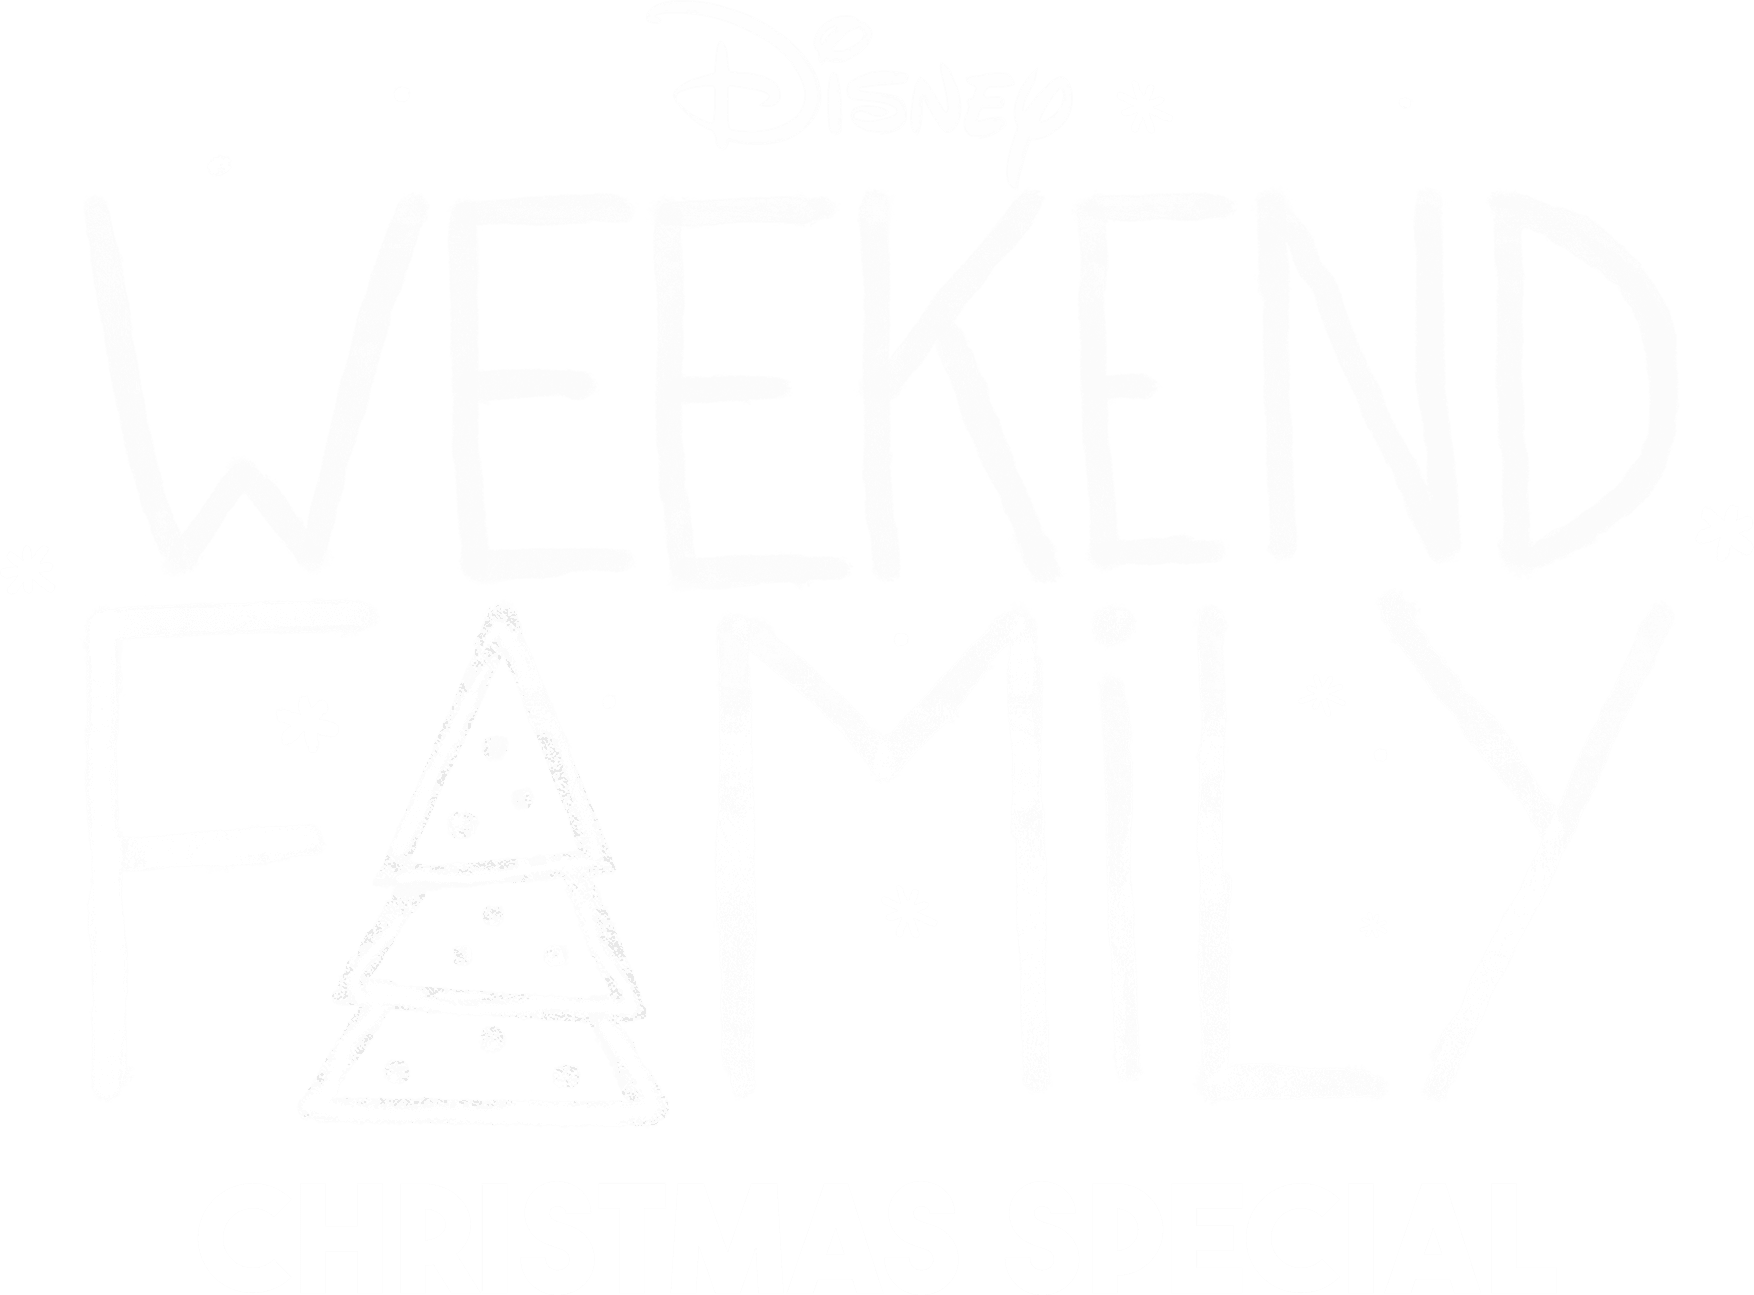 Weekend Family Christmas Special logo